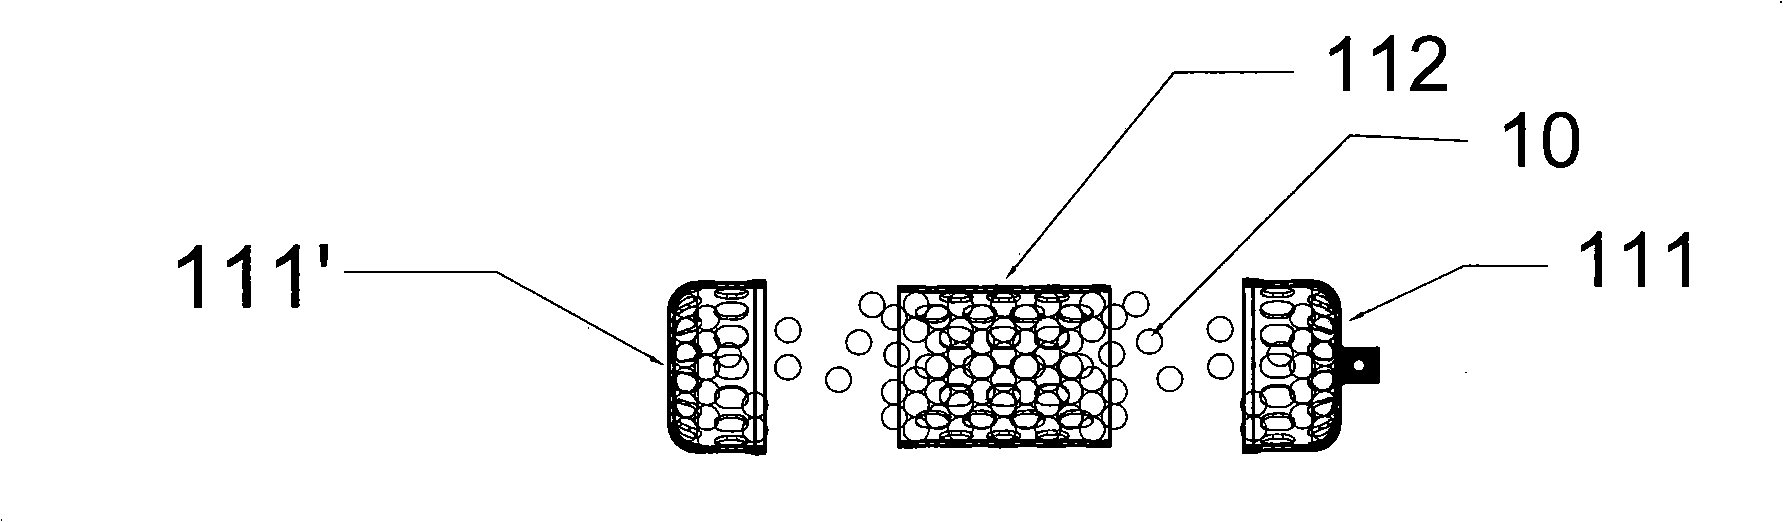 Auxiliary device for enhancing engine performance